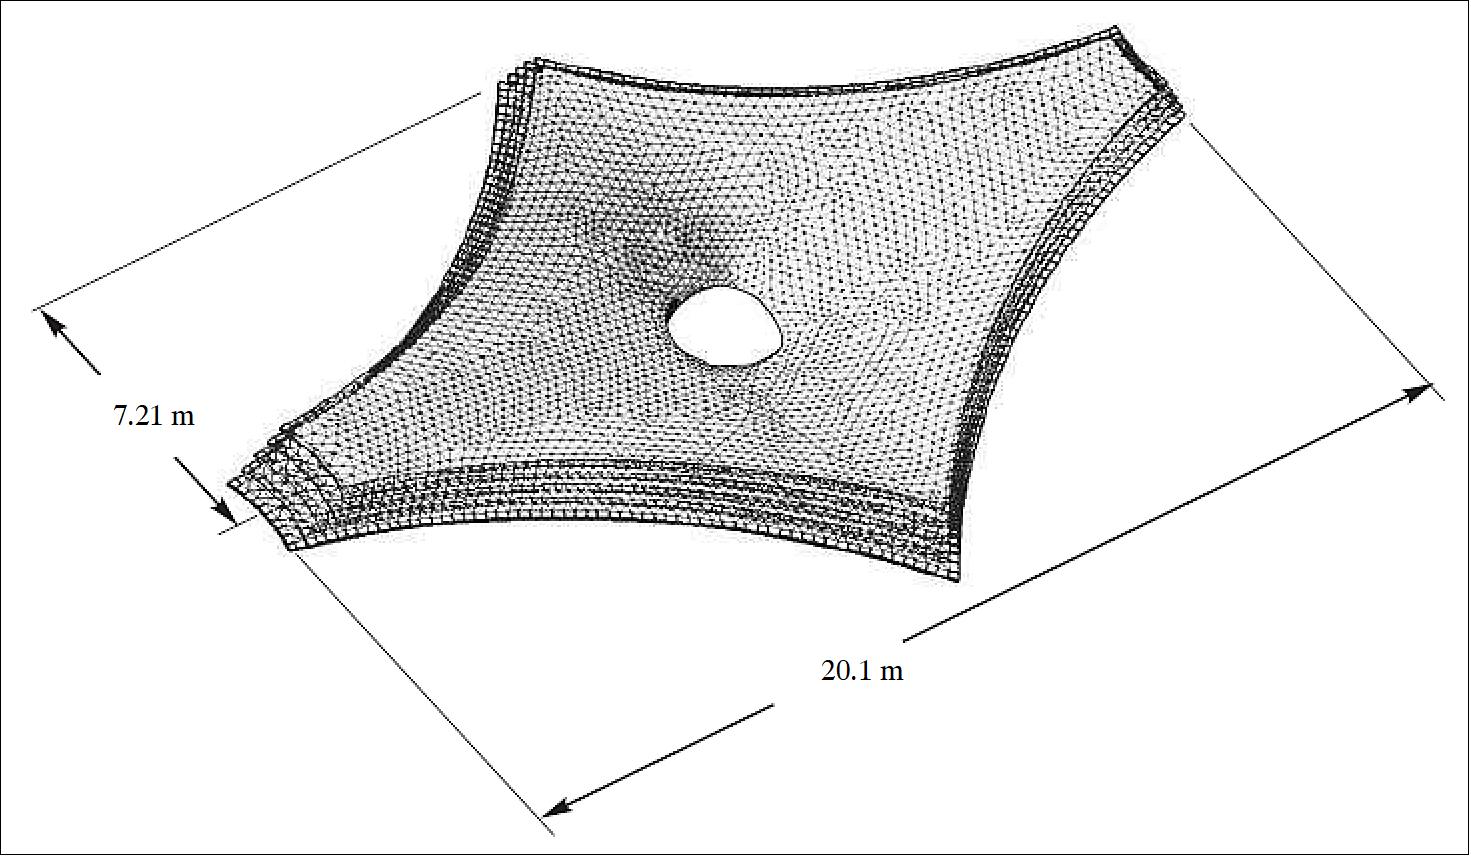 Figure 106: The five-layer finite element model of the JWST sunshield (image credit: NGAS)